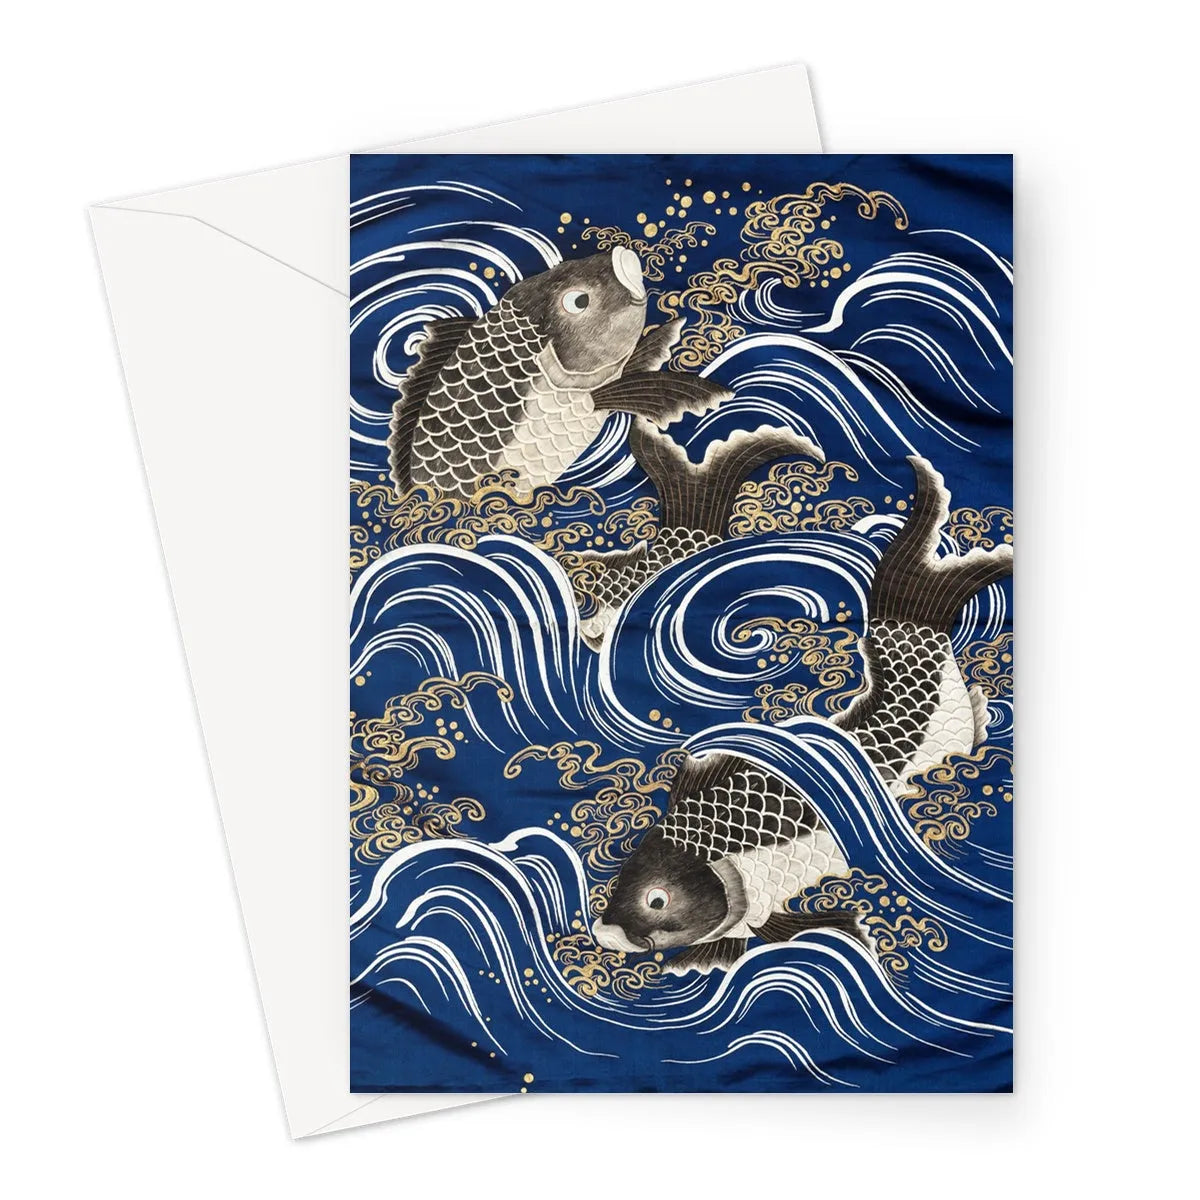 Fukusa + Carp In Waves - Meiji Period Greeting Card - A5 Portrait / 1 Card - Notebooks & Notepads - Aesthetic Art